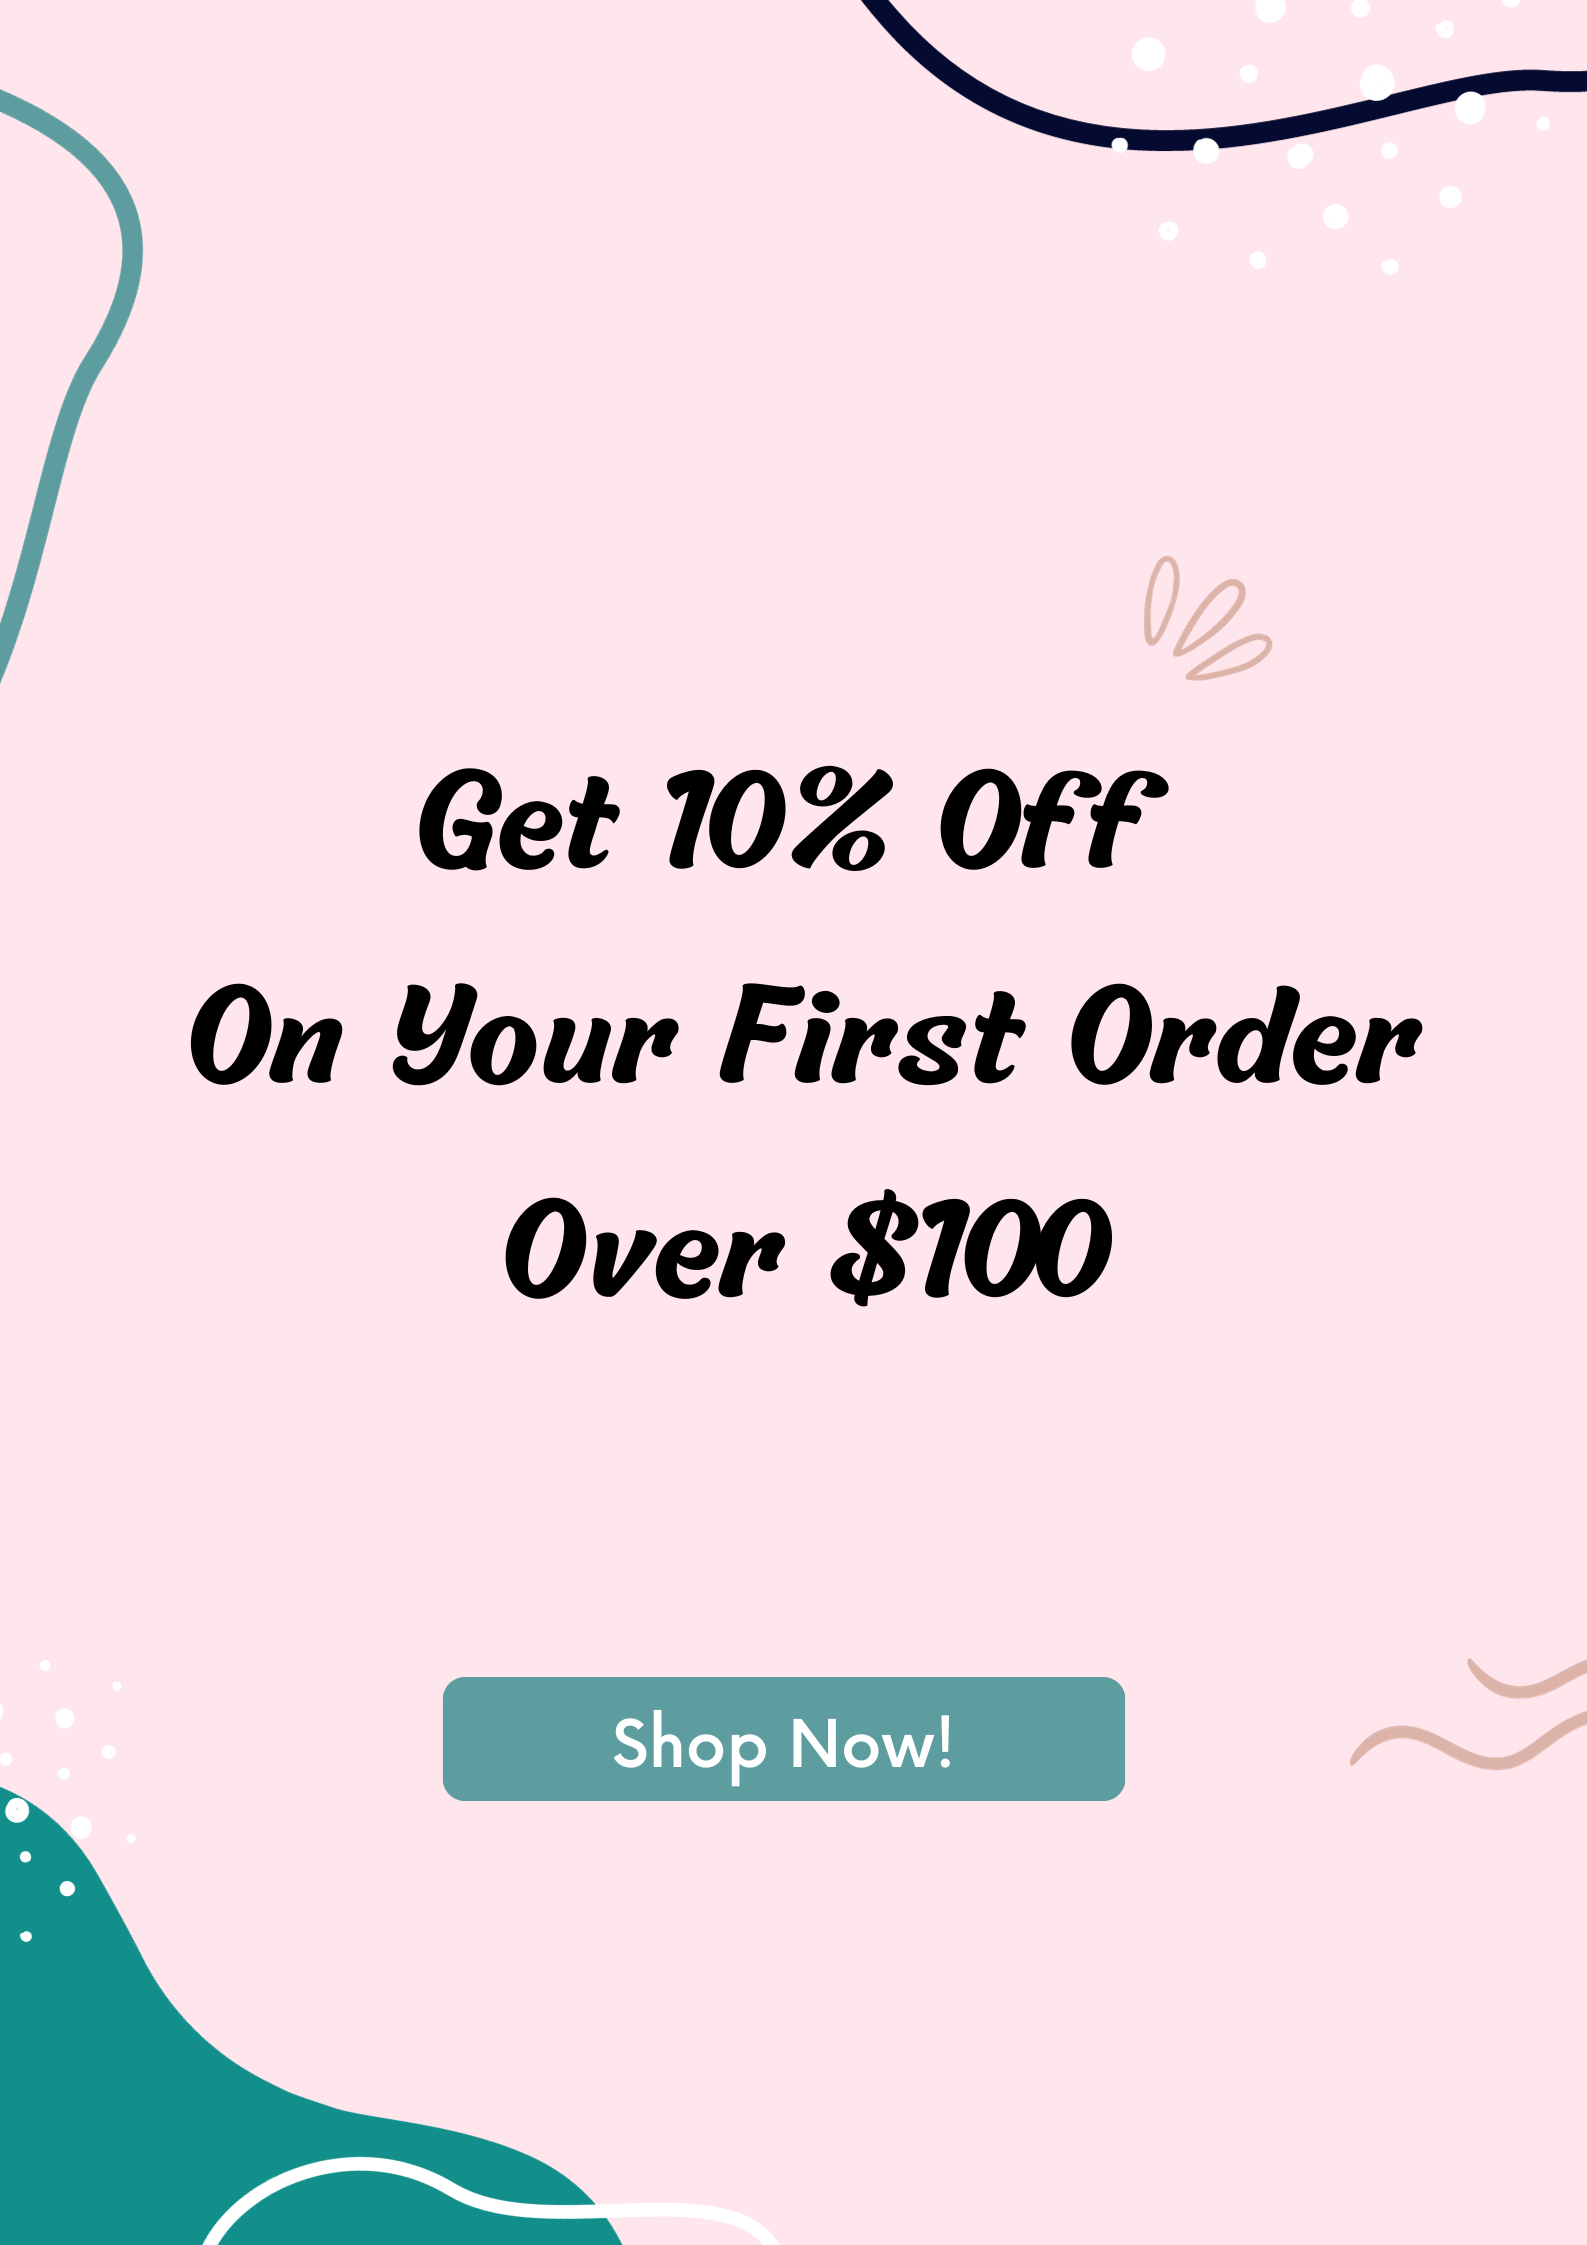 Get 10% Off Your First Order Over $100!